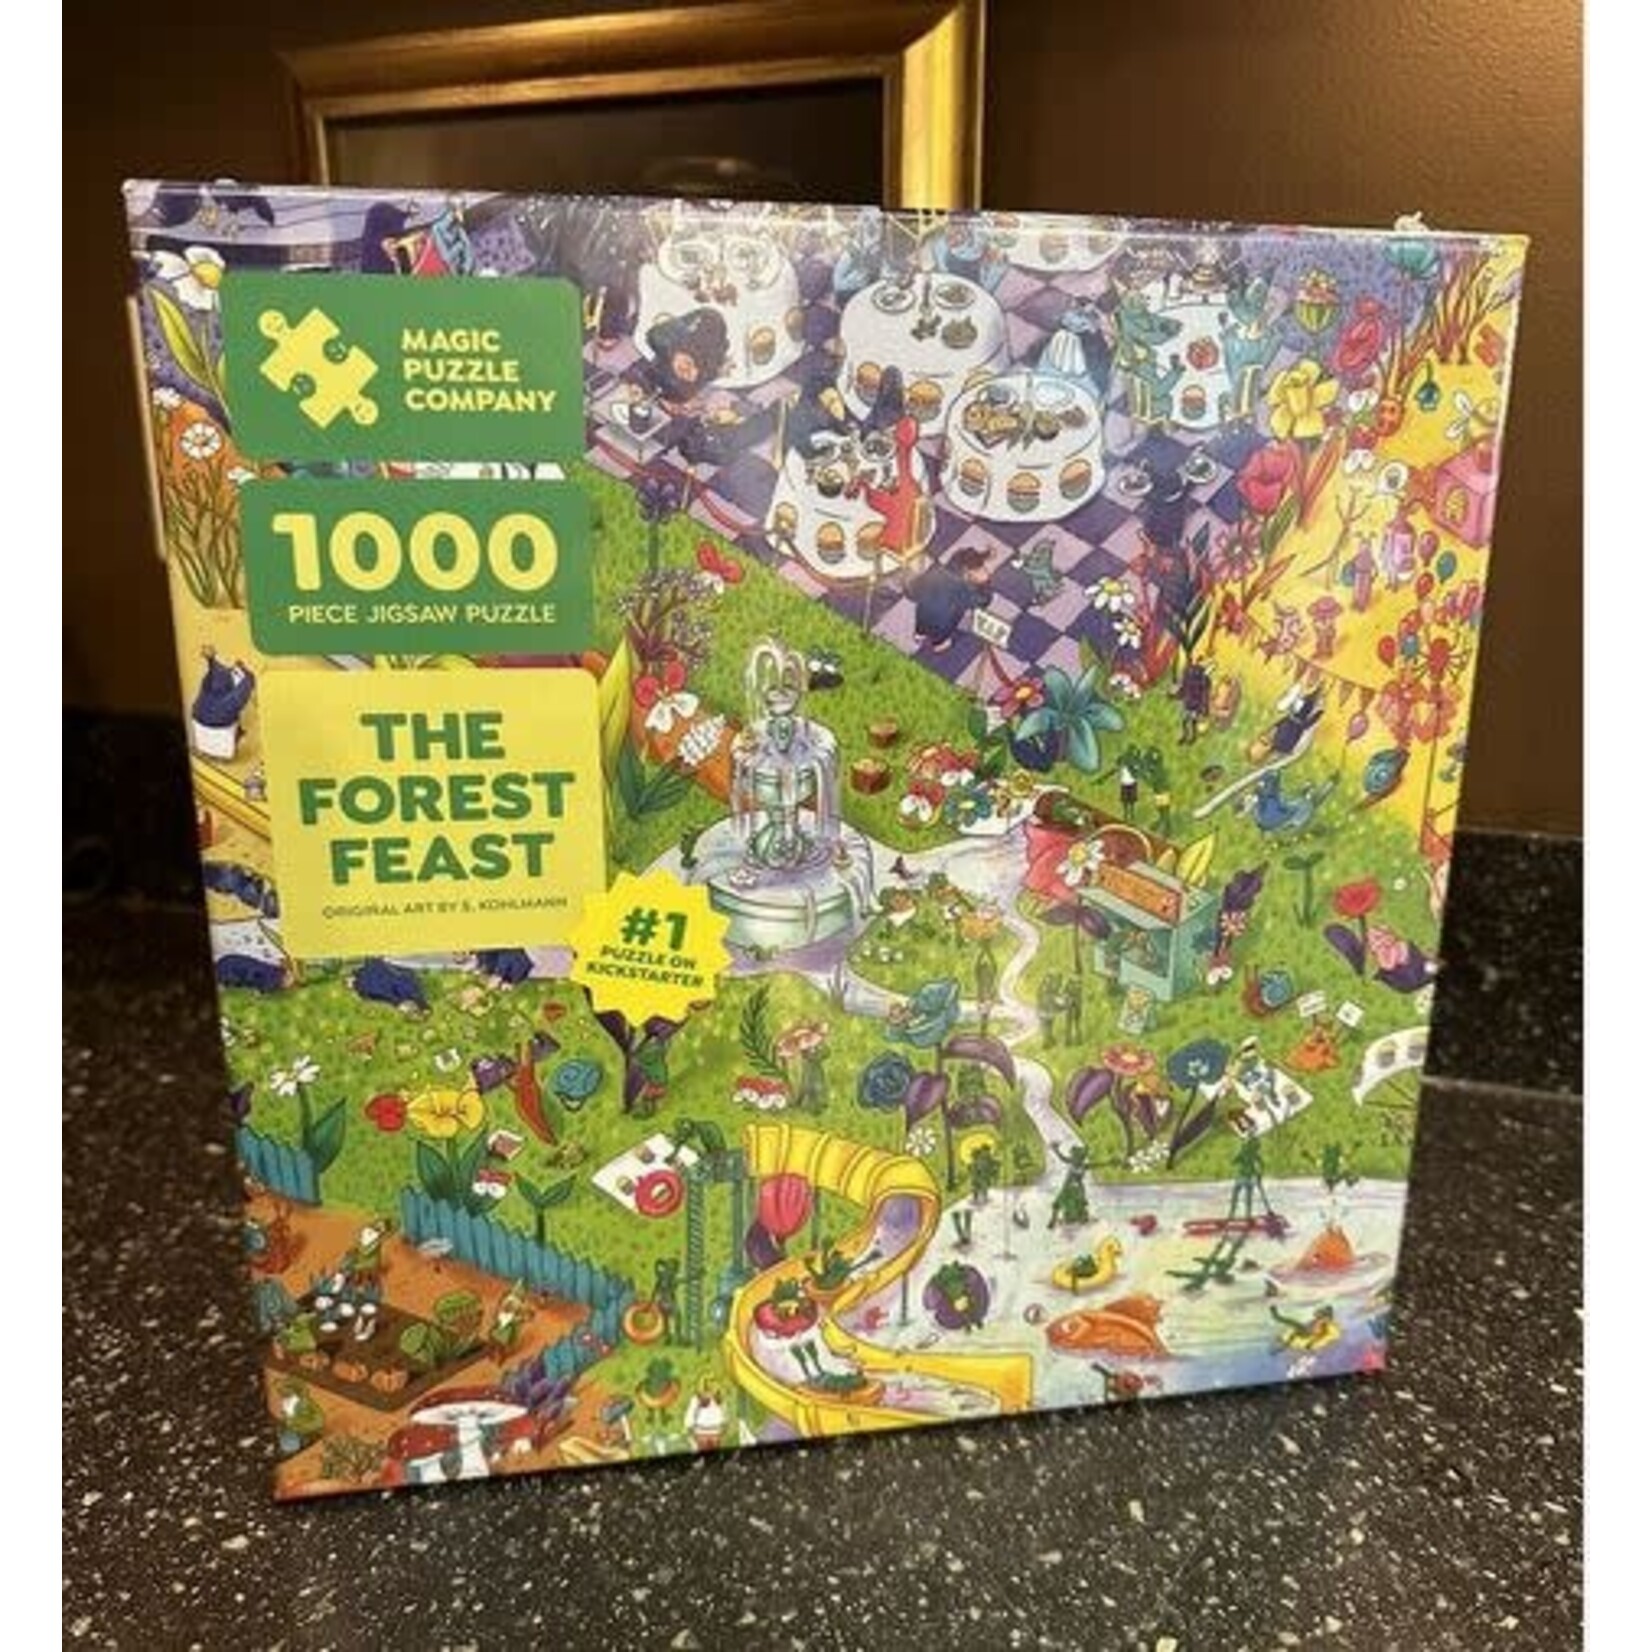 #18599 The Forest Feast Puzzle: Dragon Cache Used Game